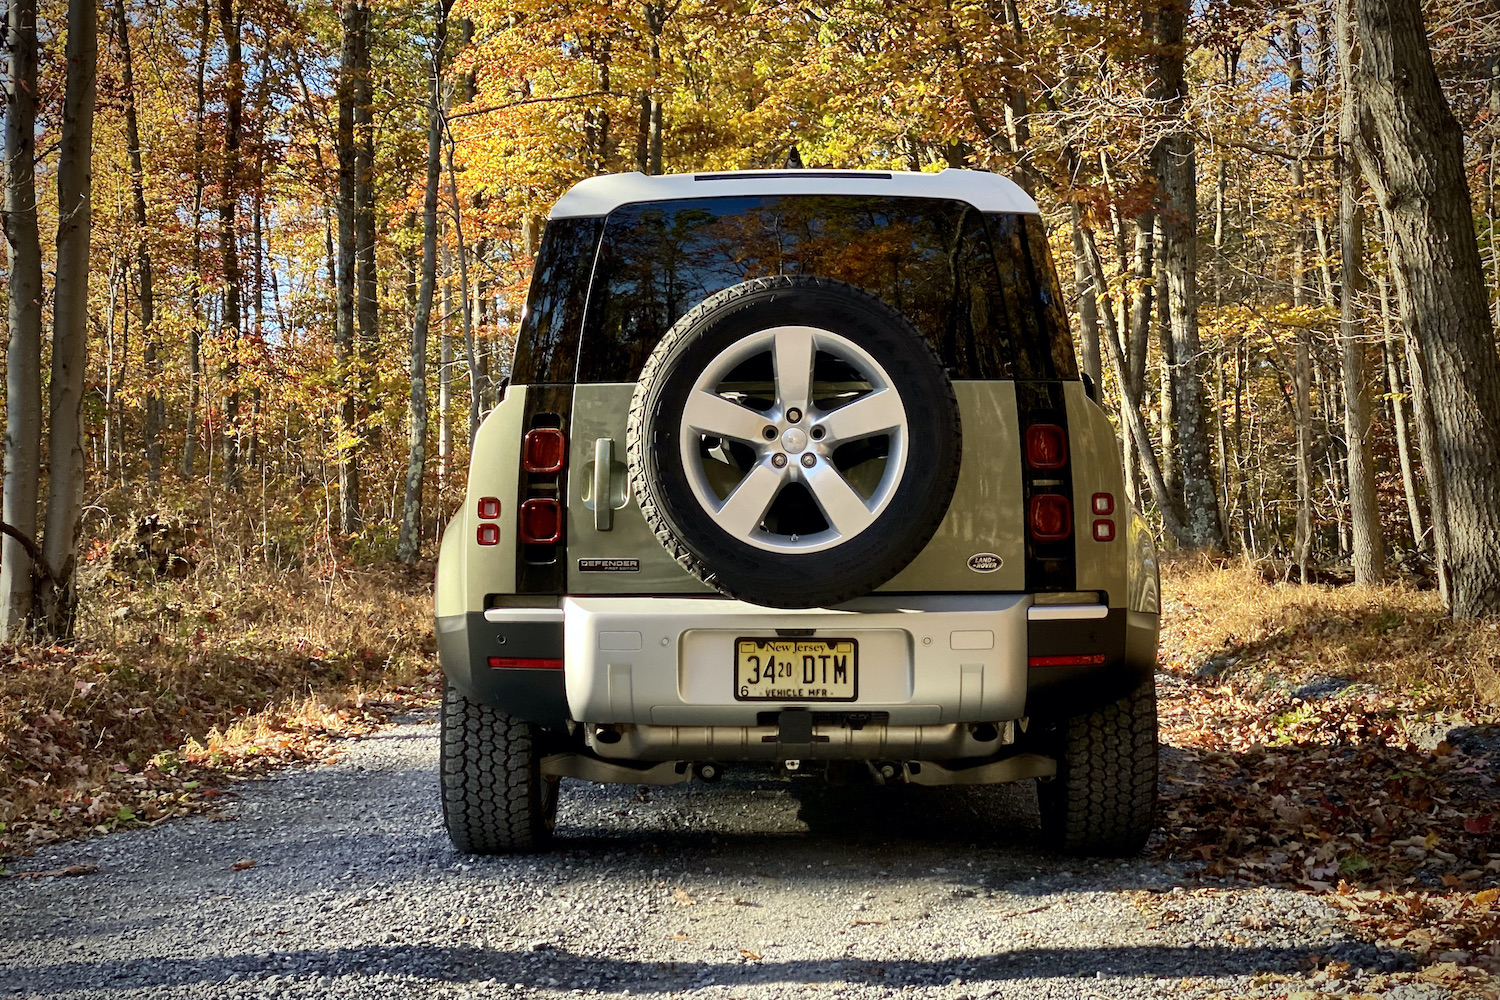 Land Rover Defender rear end on gravel road in front of trees.